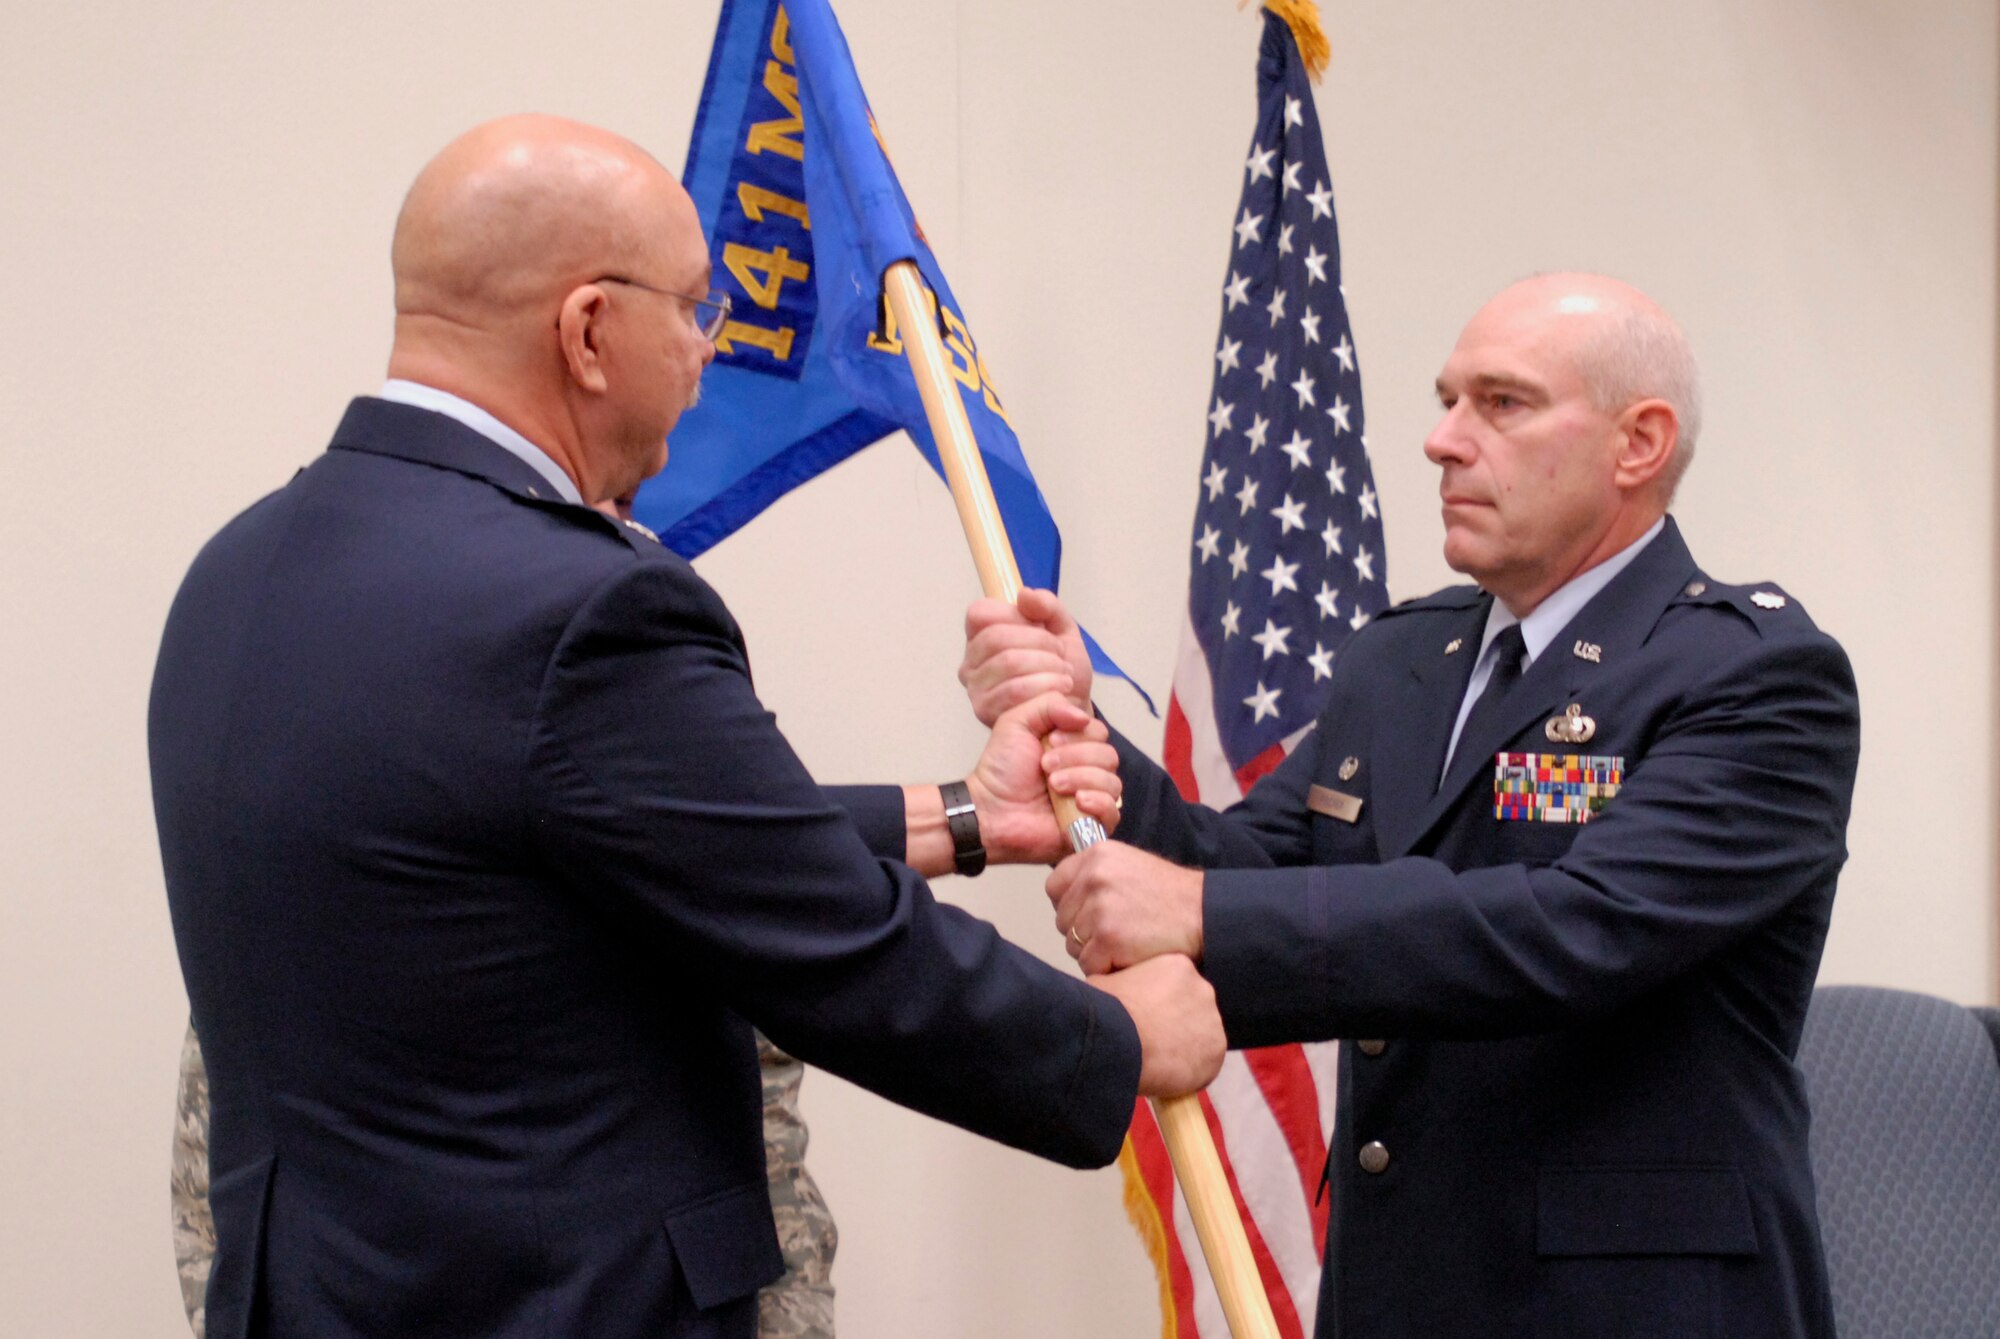 Air National Guard Lt. Col. Mark Fischer,141st Force Support Squadron commander, accepts the guideon from Lt. Col. Michael Hirst, 141st Mission Support Group commander, during the stand-up ceremony for the new 141st Force Support Squadron, Fairchild AFB, Wash., Oct. 5, 2009. (U.S. Air Force photo by Staff Sgt. Anthony Ennamorato/Released)